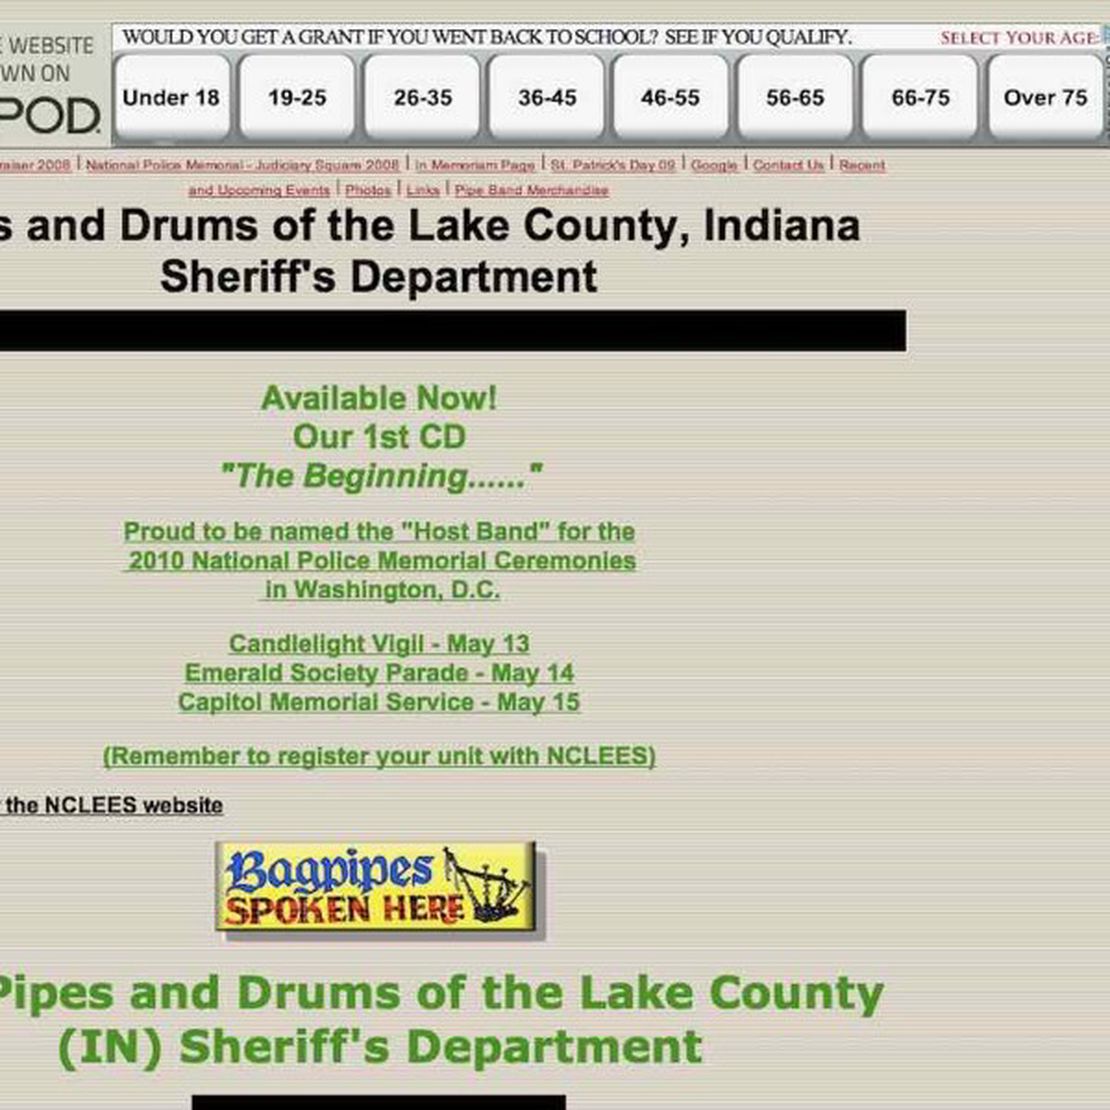 pipes and drums of lake county